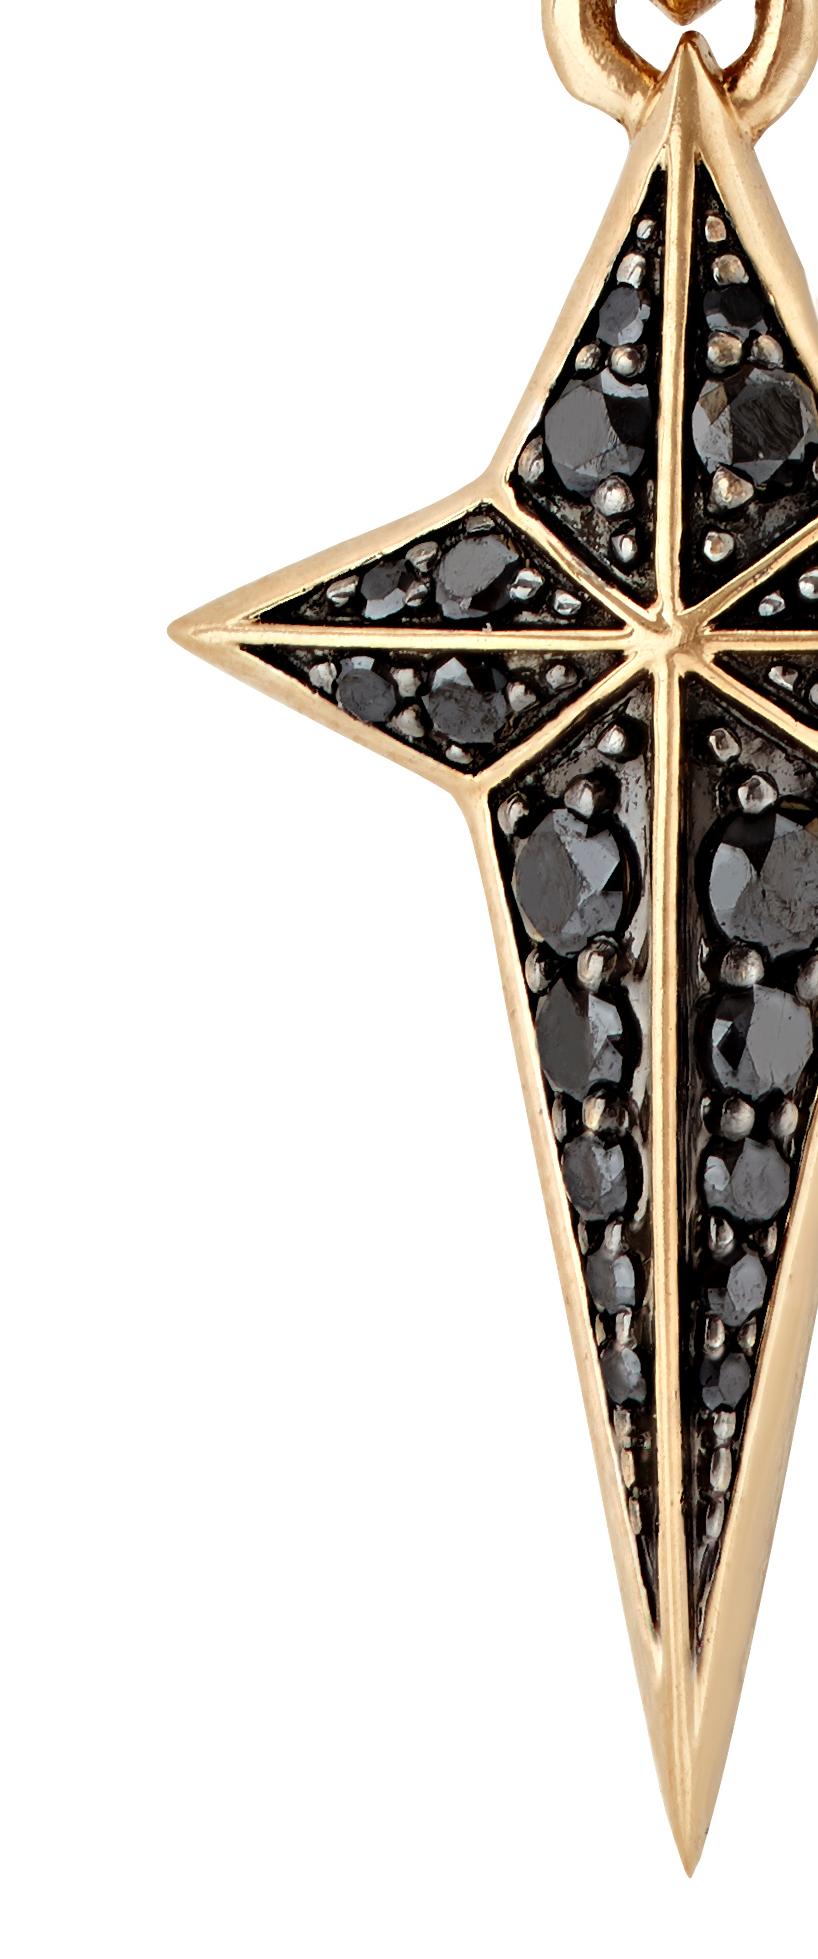 New Cross is the latest edition of Stephen Webster's religious iconography for men and is featured on the body of the Flipside Sovereign Ring with a stand out 3D finish elevating the design details. Set in 18K yellow gold with black diamonds